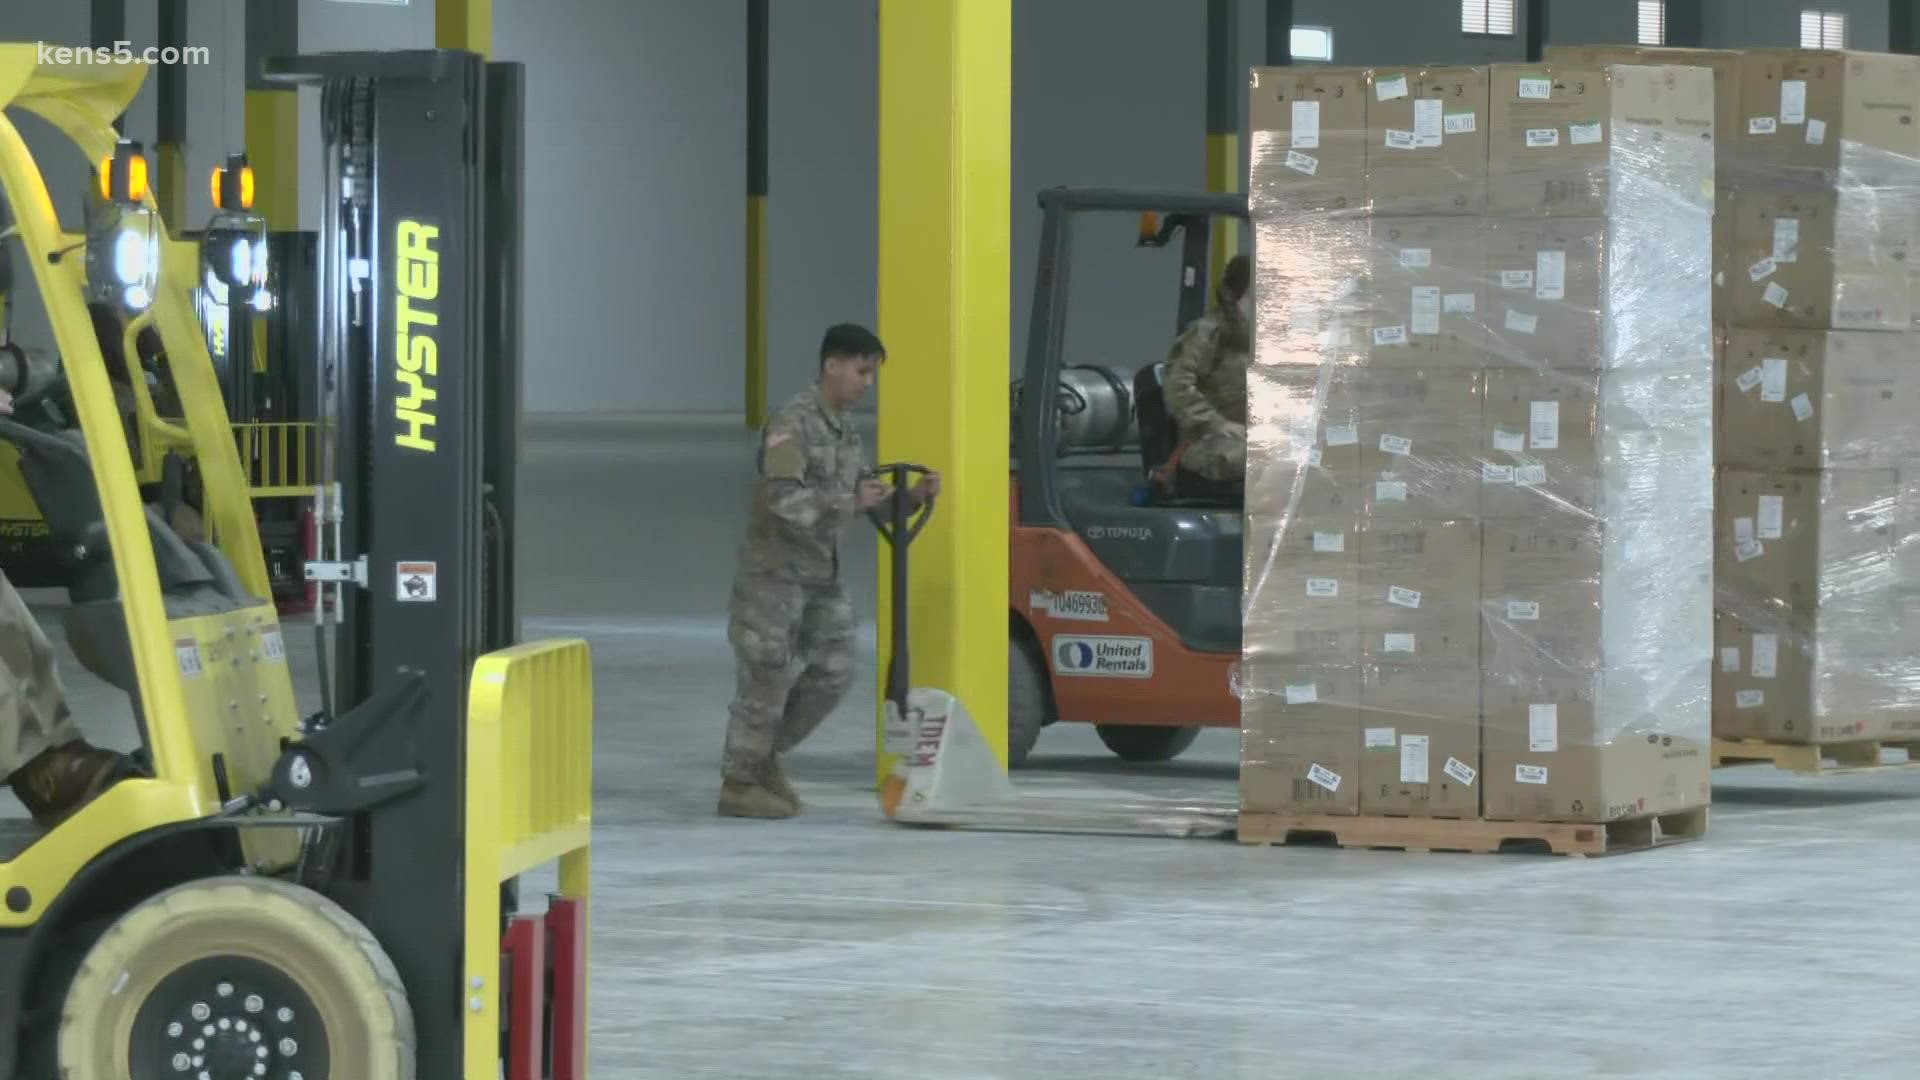 The first of 8 warehouses to house the Strategic Texas Stockpile opens in San Antonio.